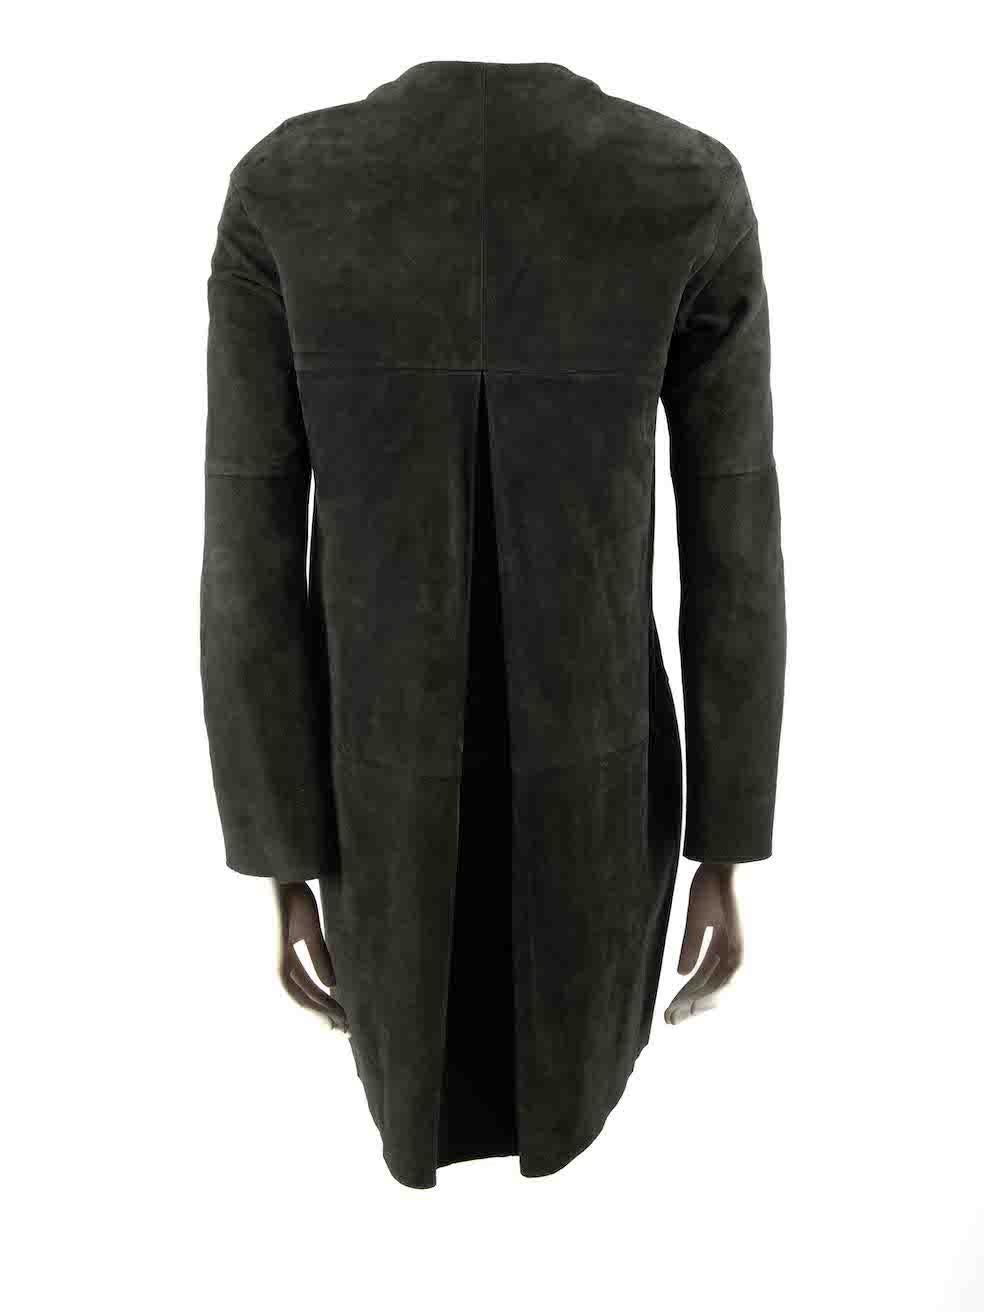 Max Mara Green Suede Mid-Length Coat Size XS In Excellent Condition For Sale In London, GB